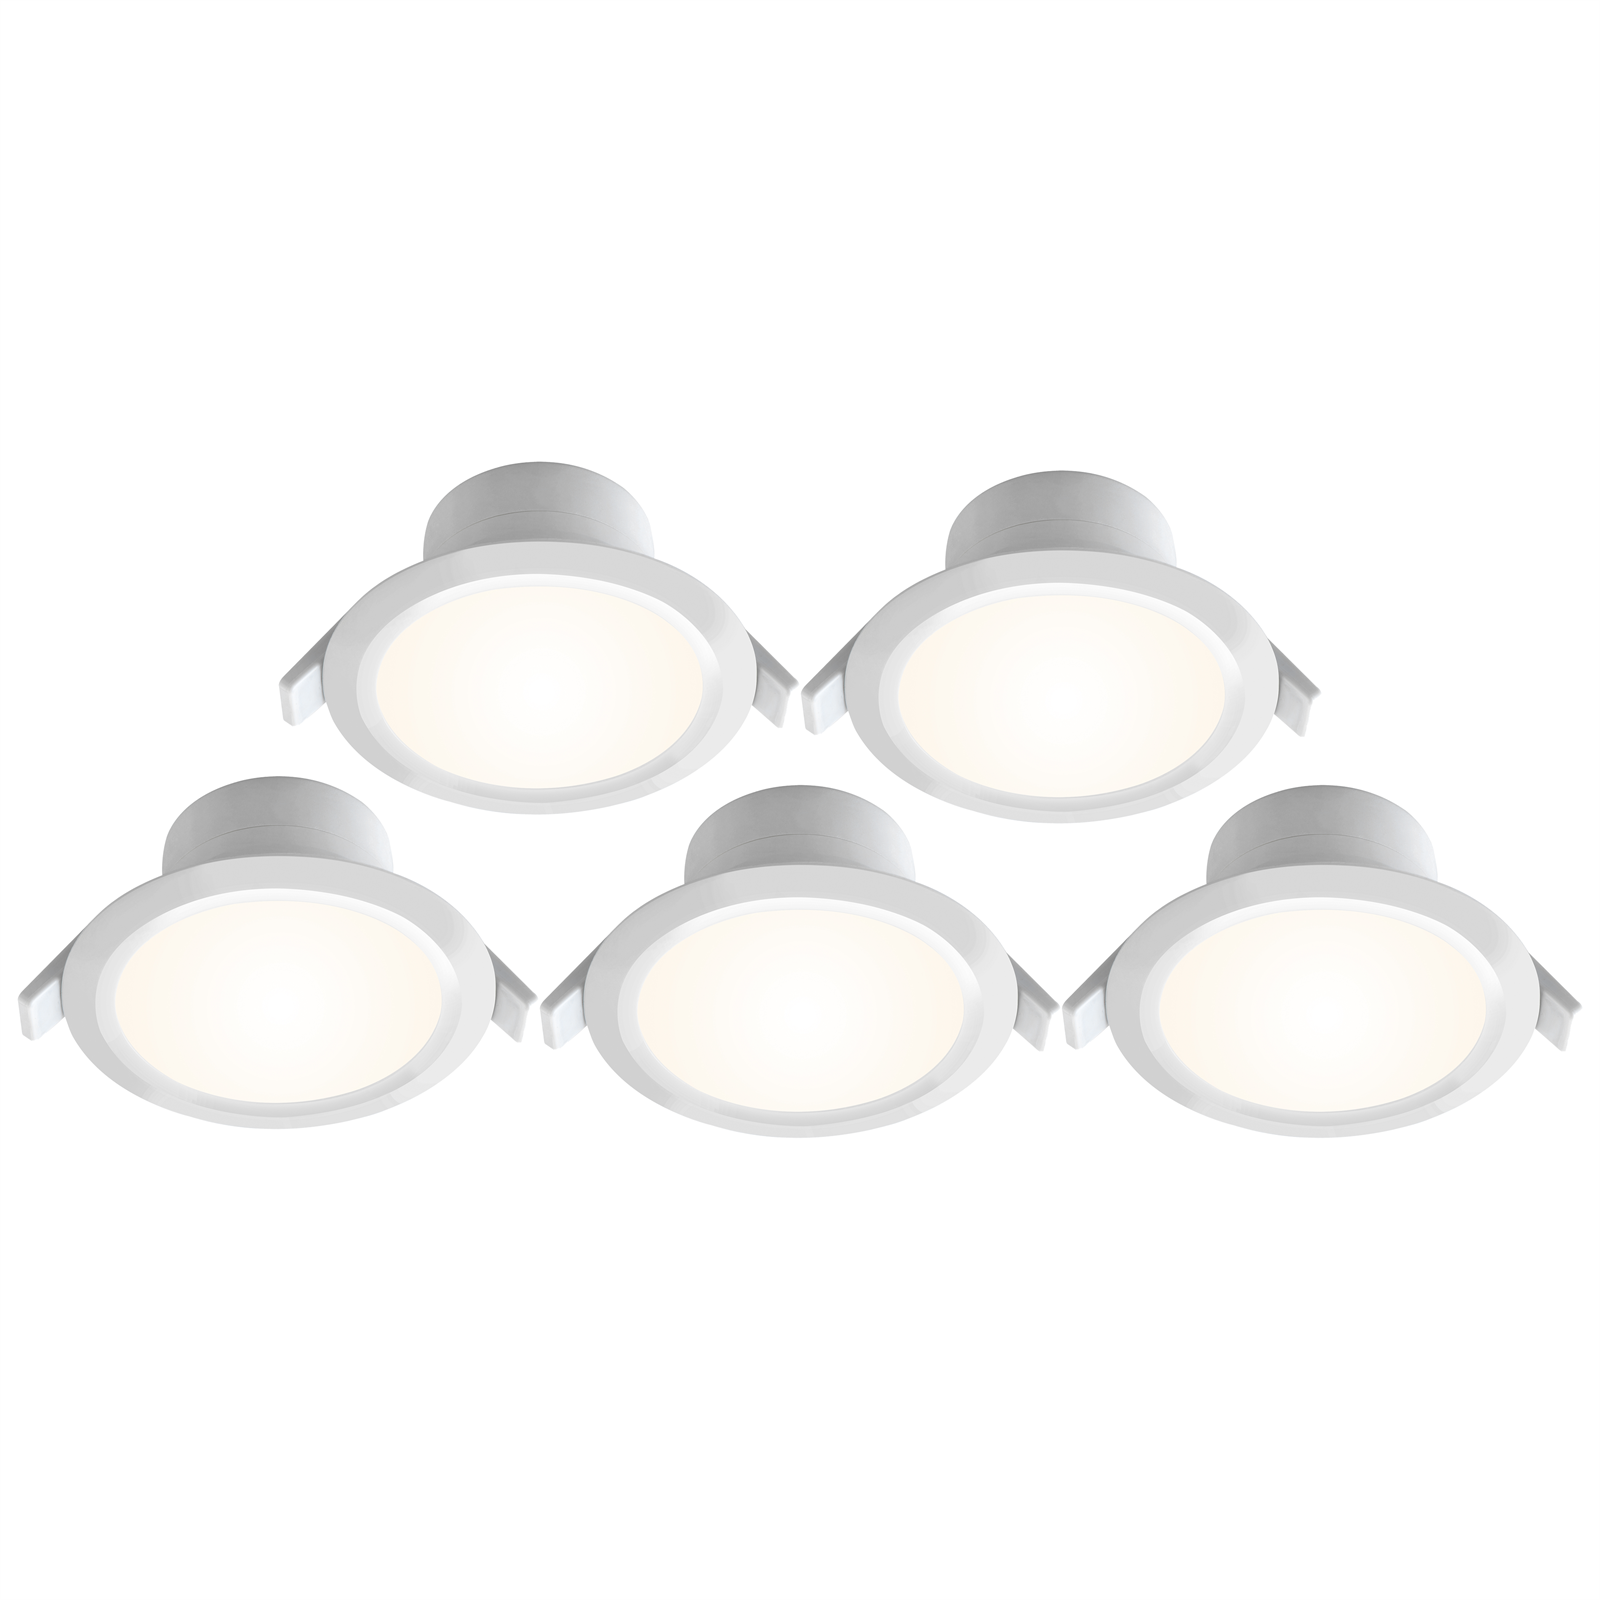 Deta 12W Dimmable LED Downlight - 5 Pack